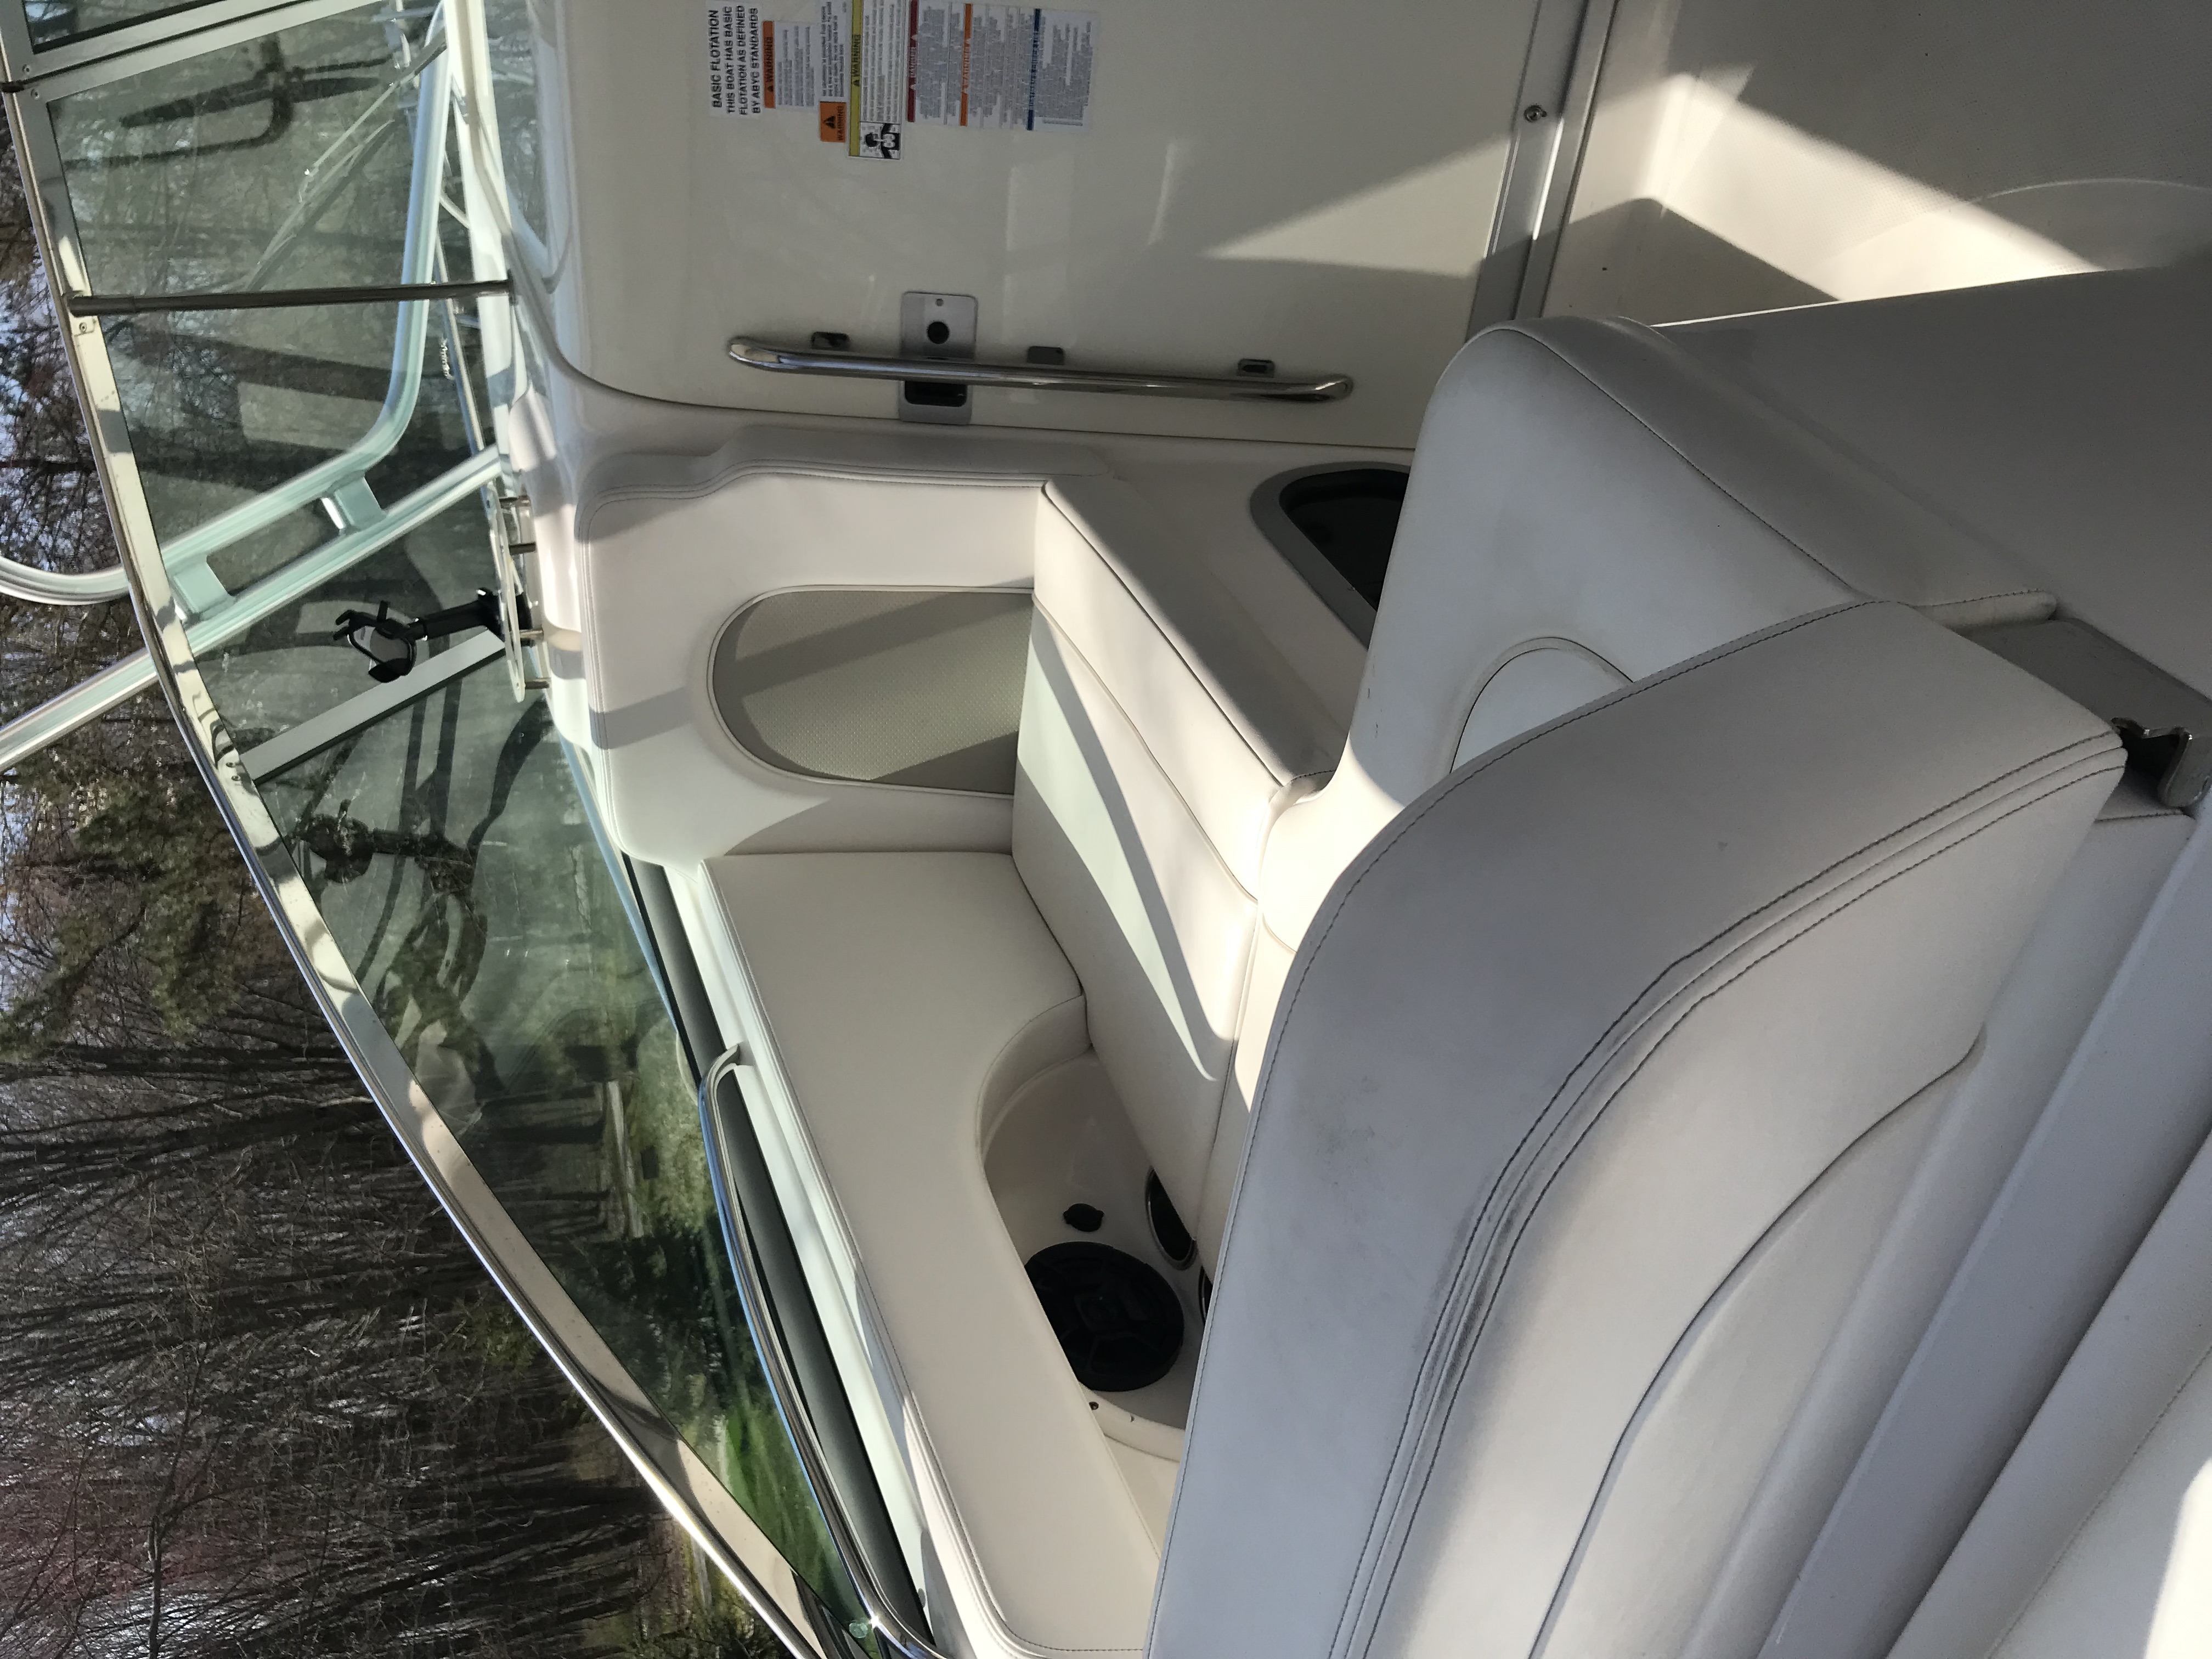 2014 Robalo R 305 wa Power boat for sale in Berlin Hts, OH - image 9 